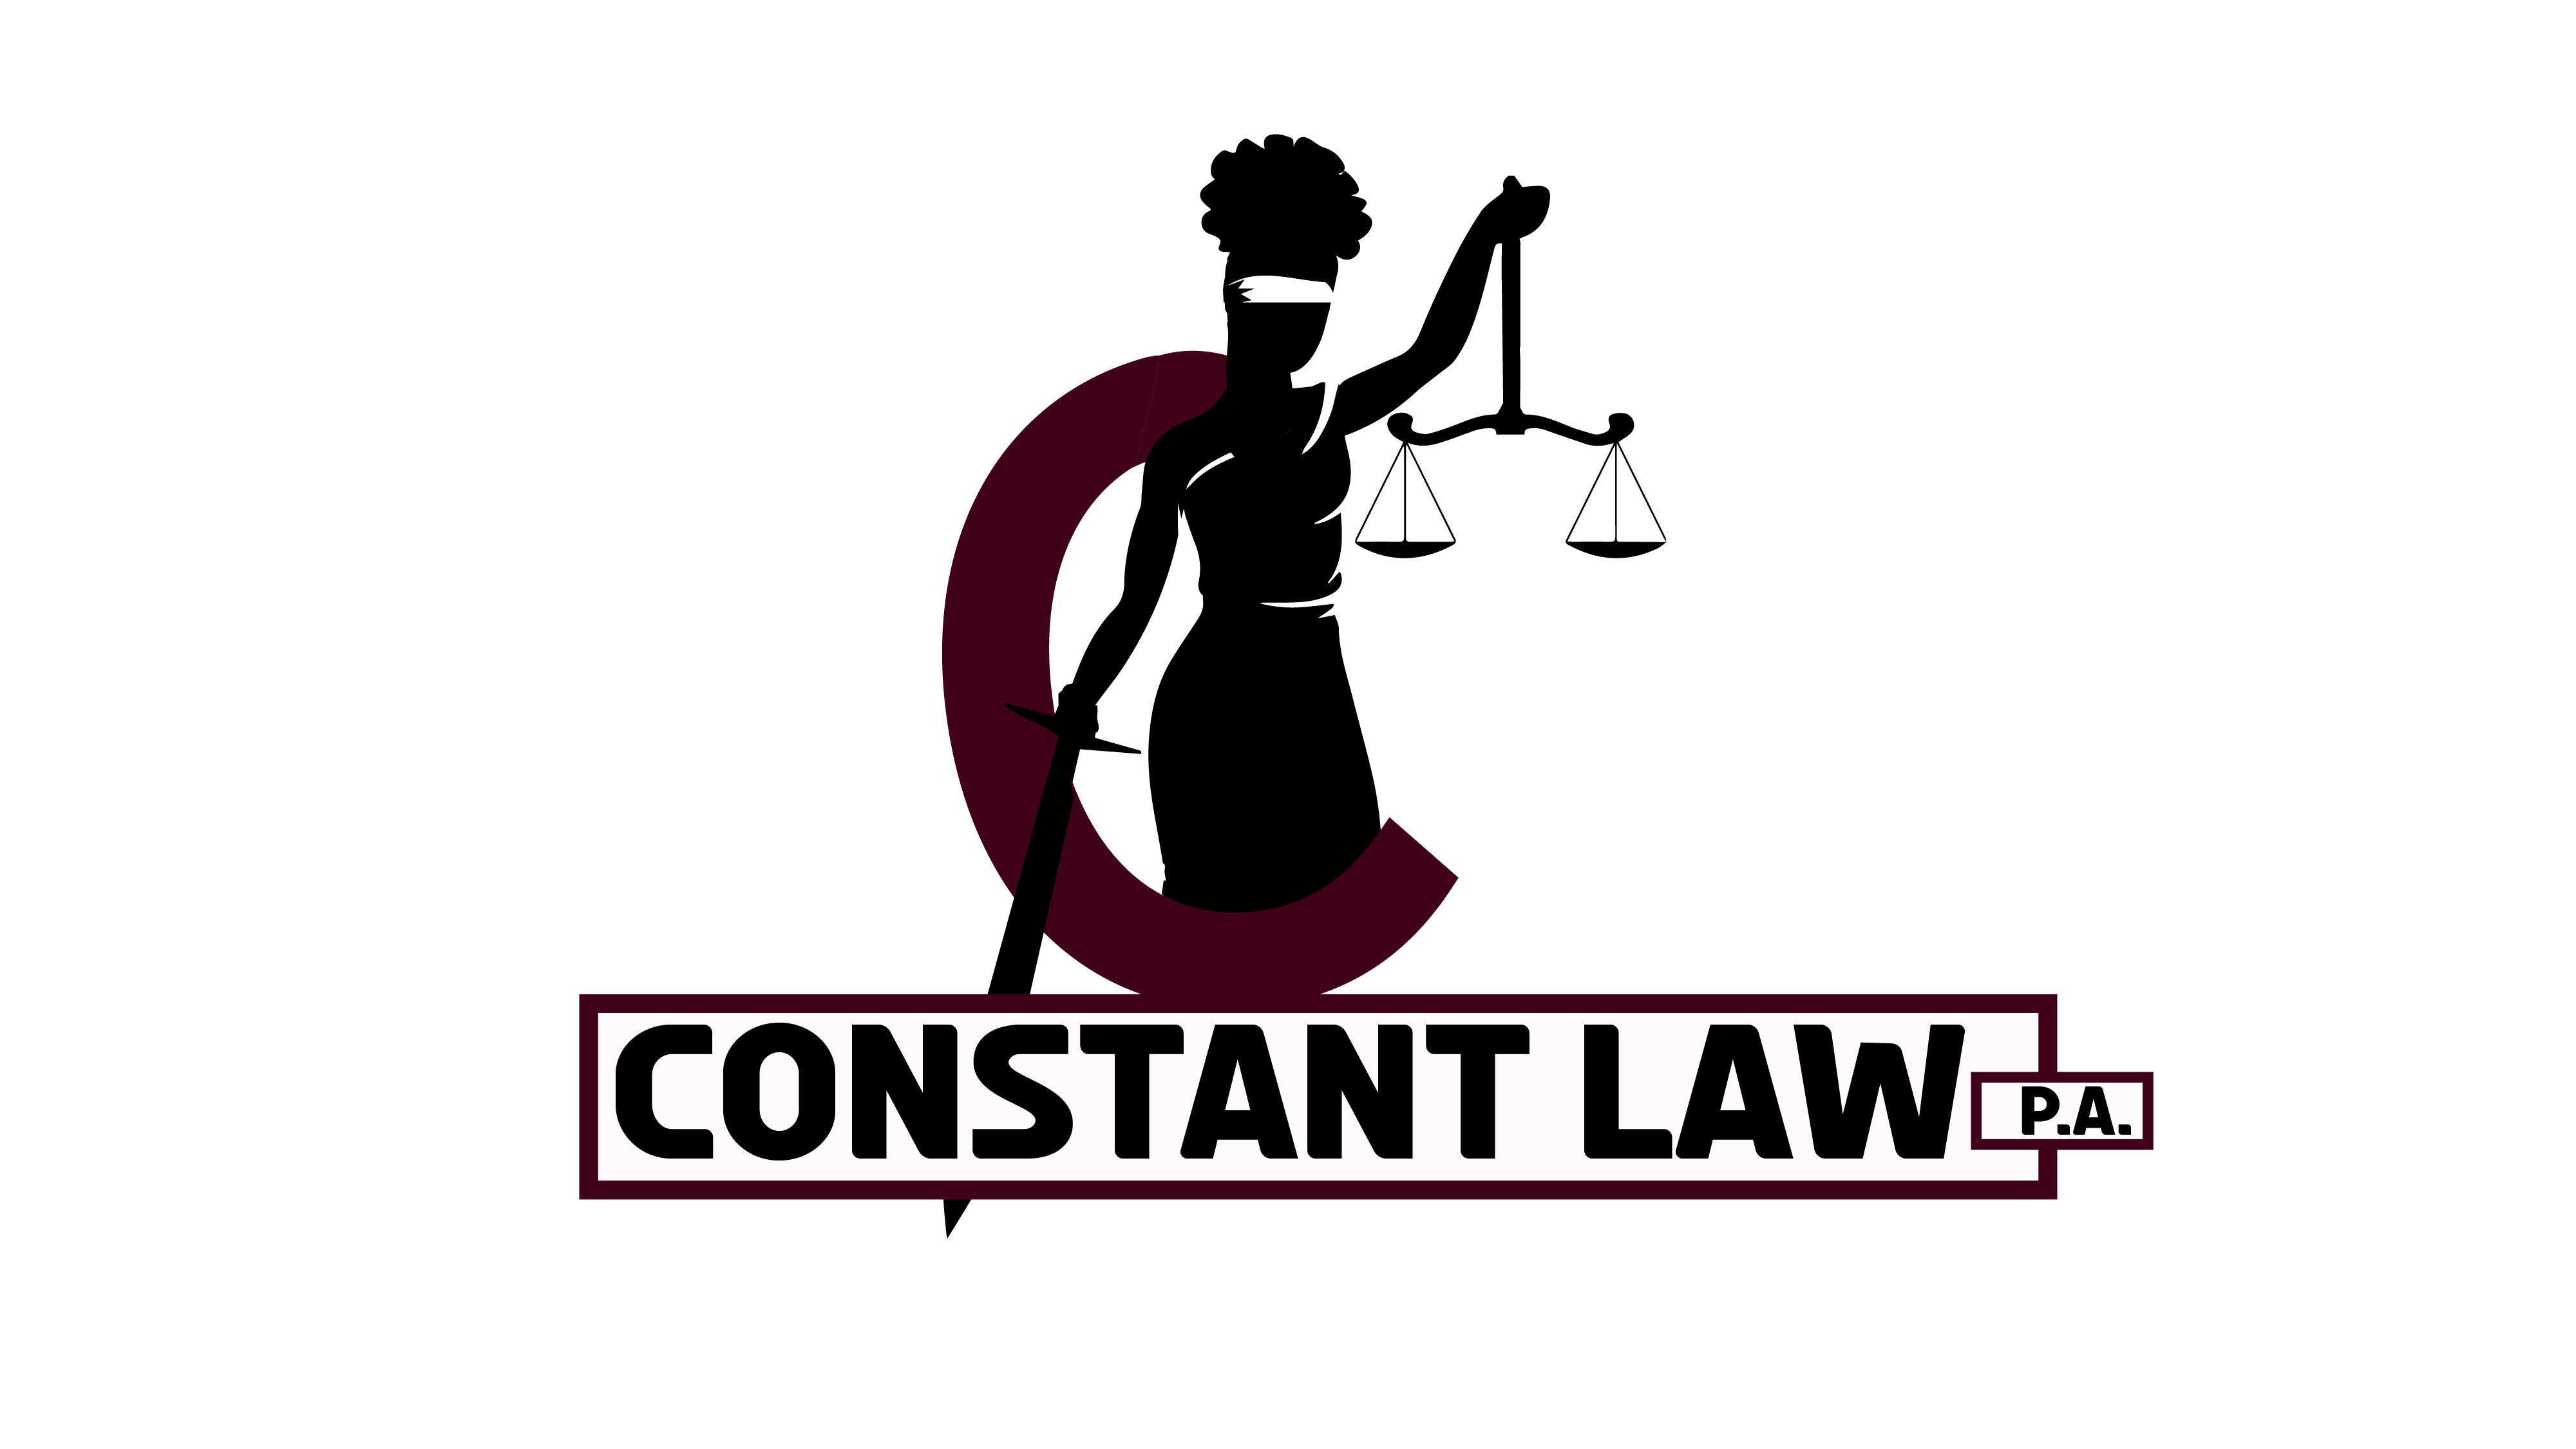 Constant Law, P.A. addresses the Need for Estate Planning in Florida